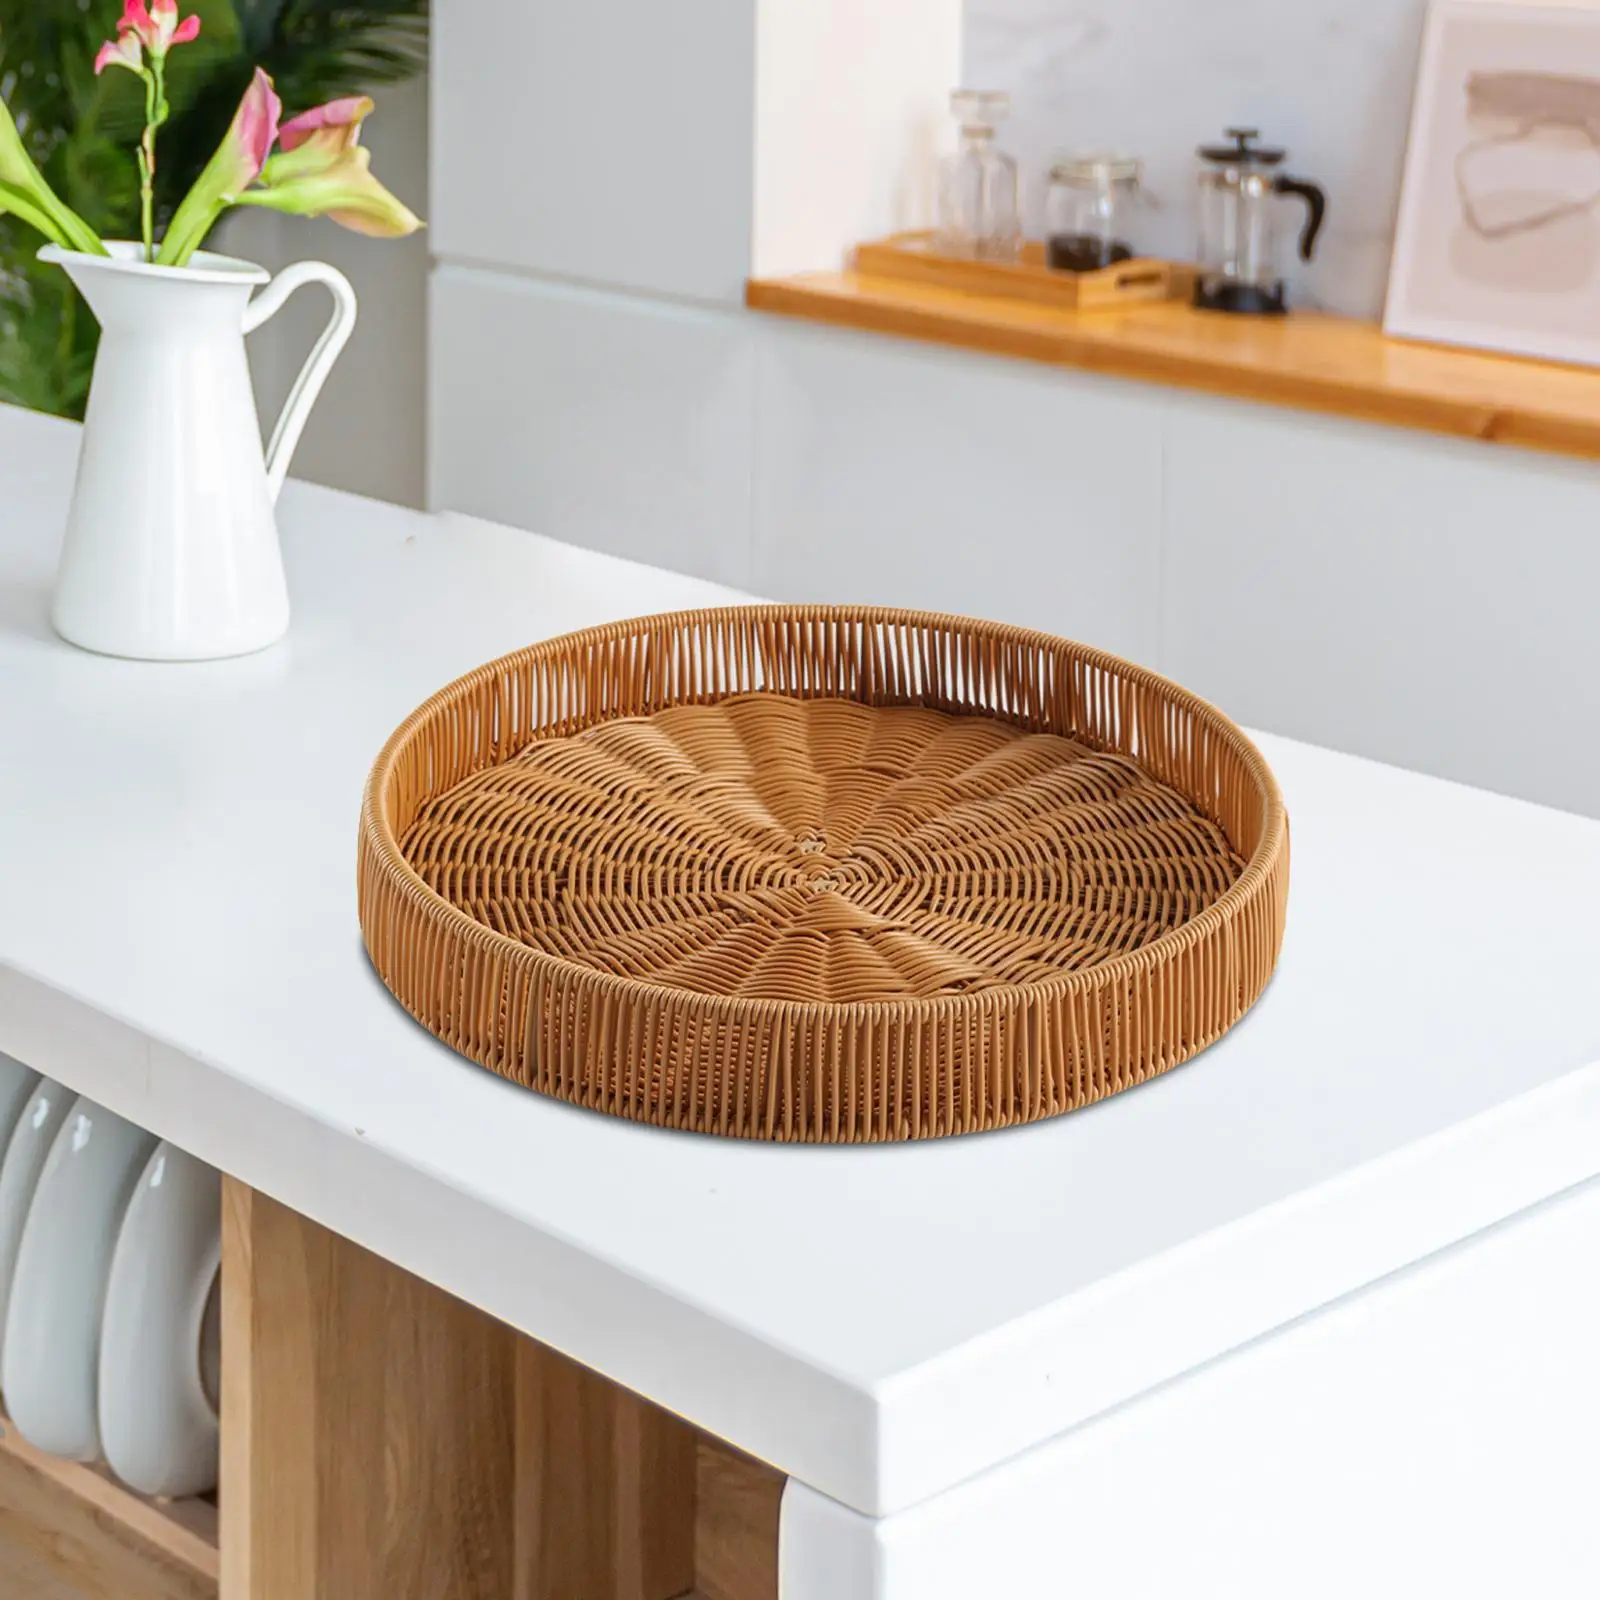 Round Imitation Rattan Tray Rustic Hand Woven Serving Tray Bread Basket Ottoman